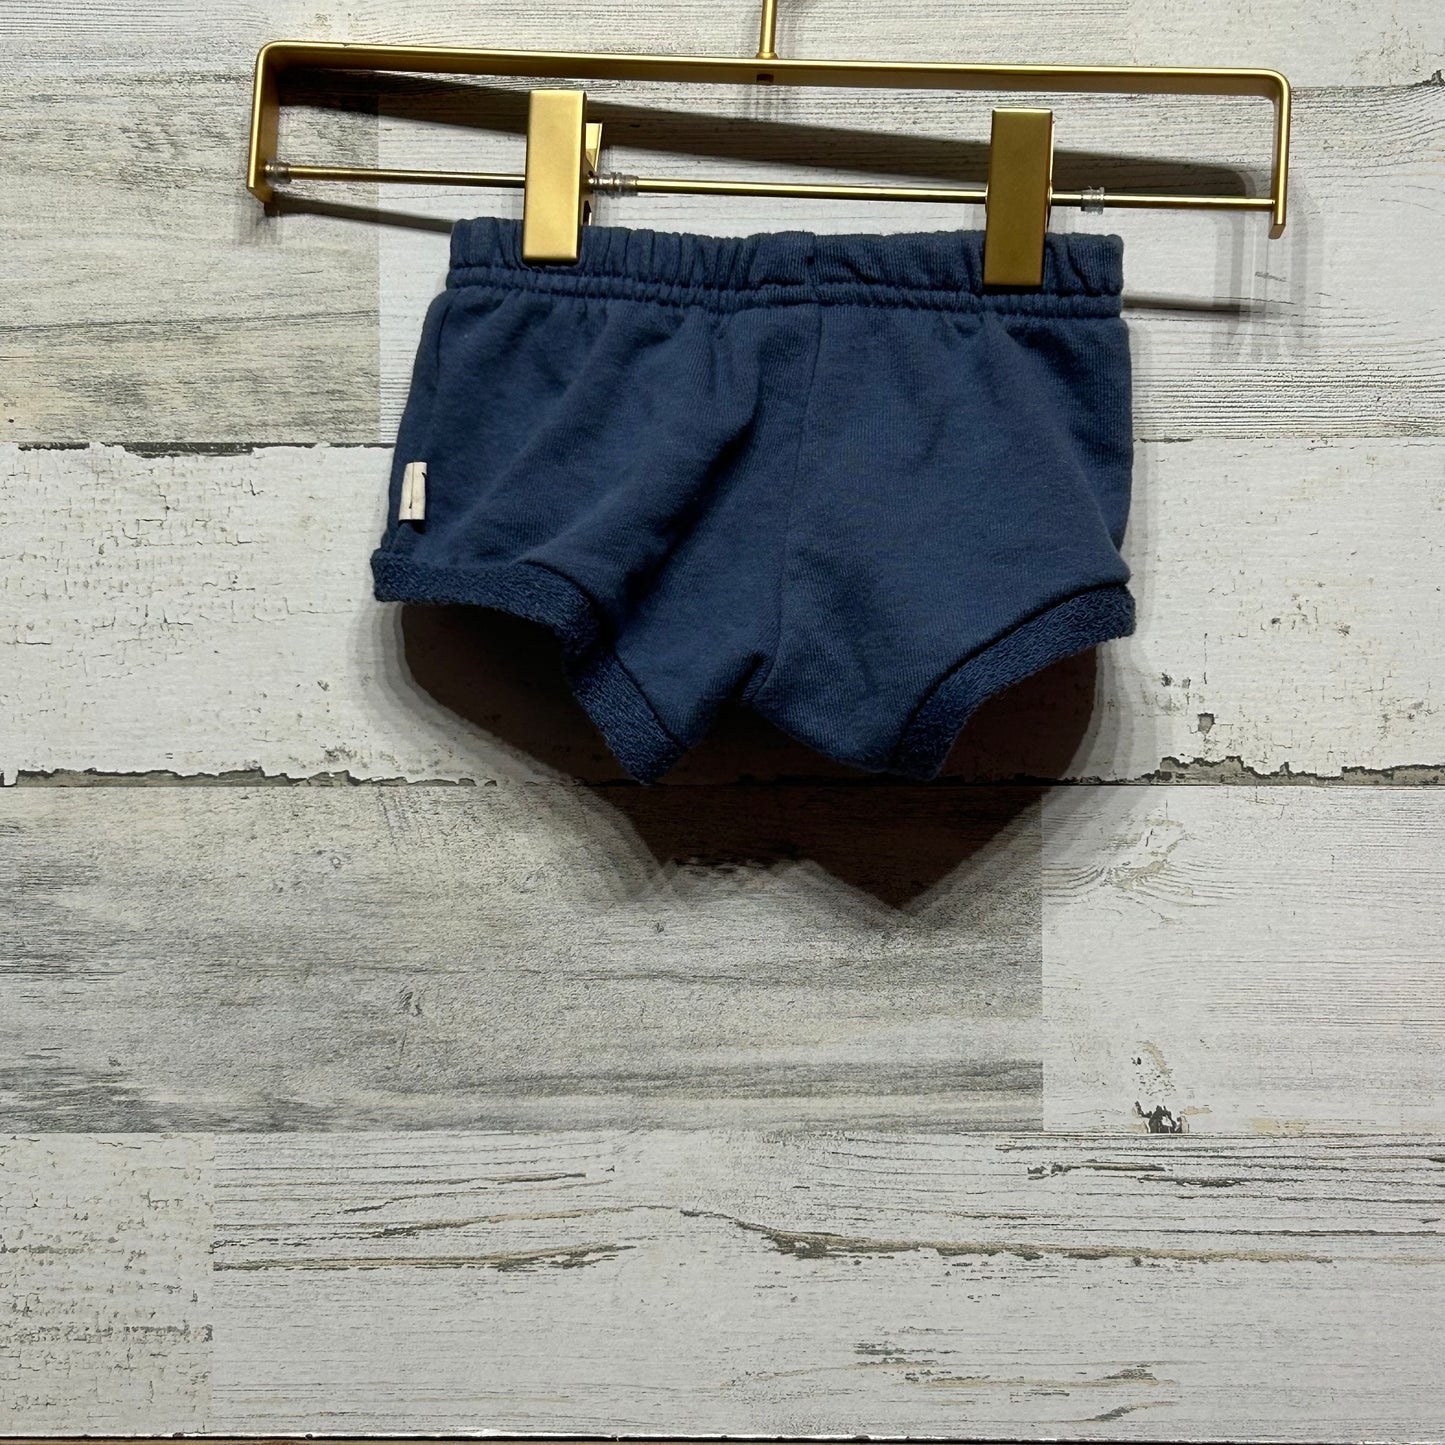 Size 3-6m Easy Peasy Organic Cotton Blend Navy Shorts - Good Used Condition